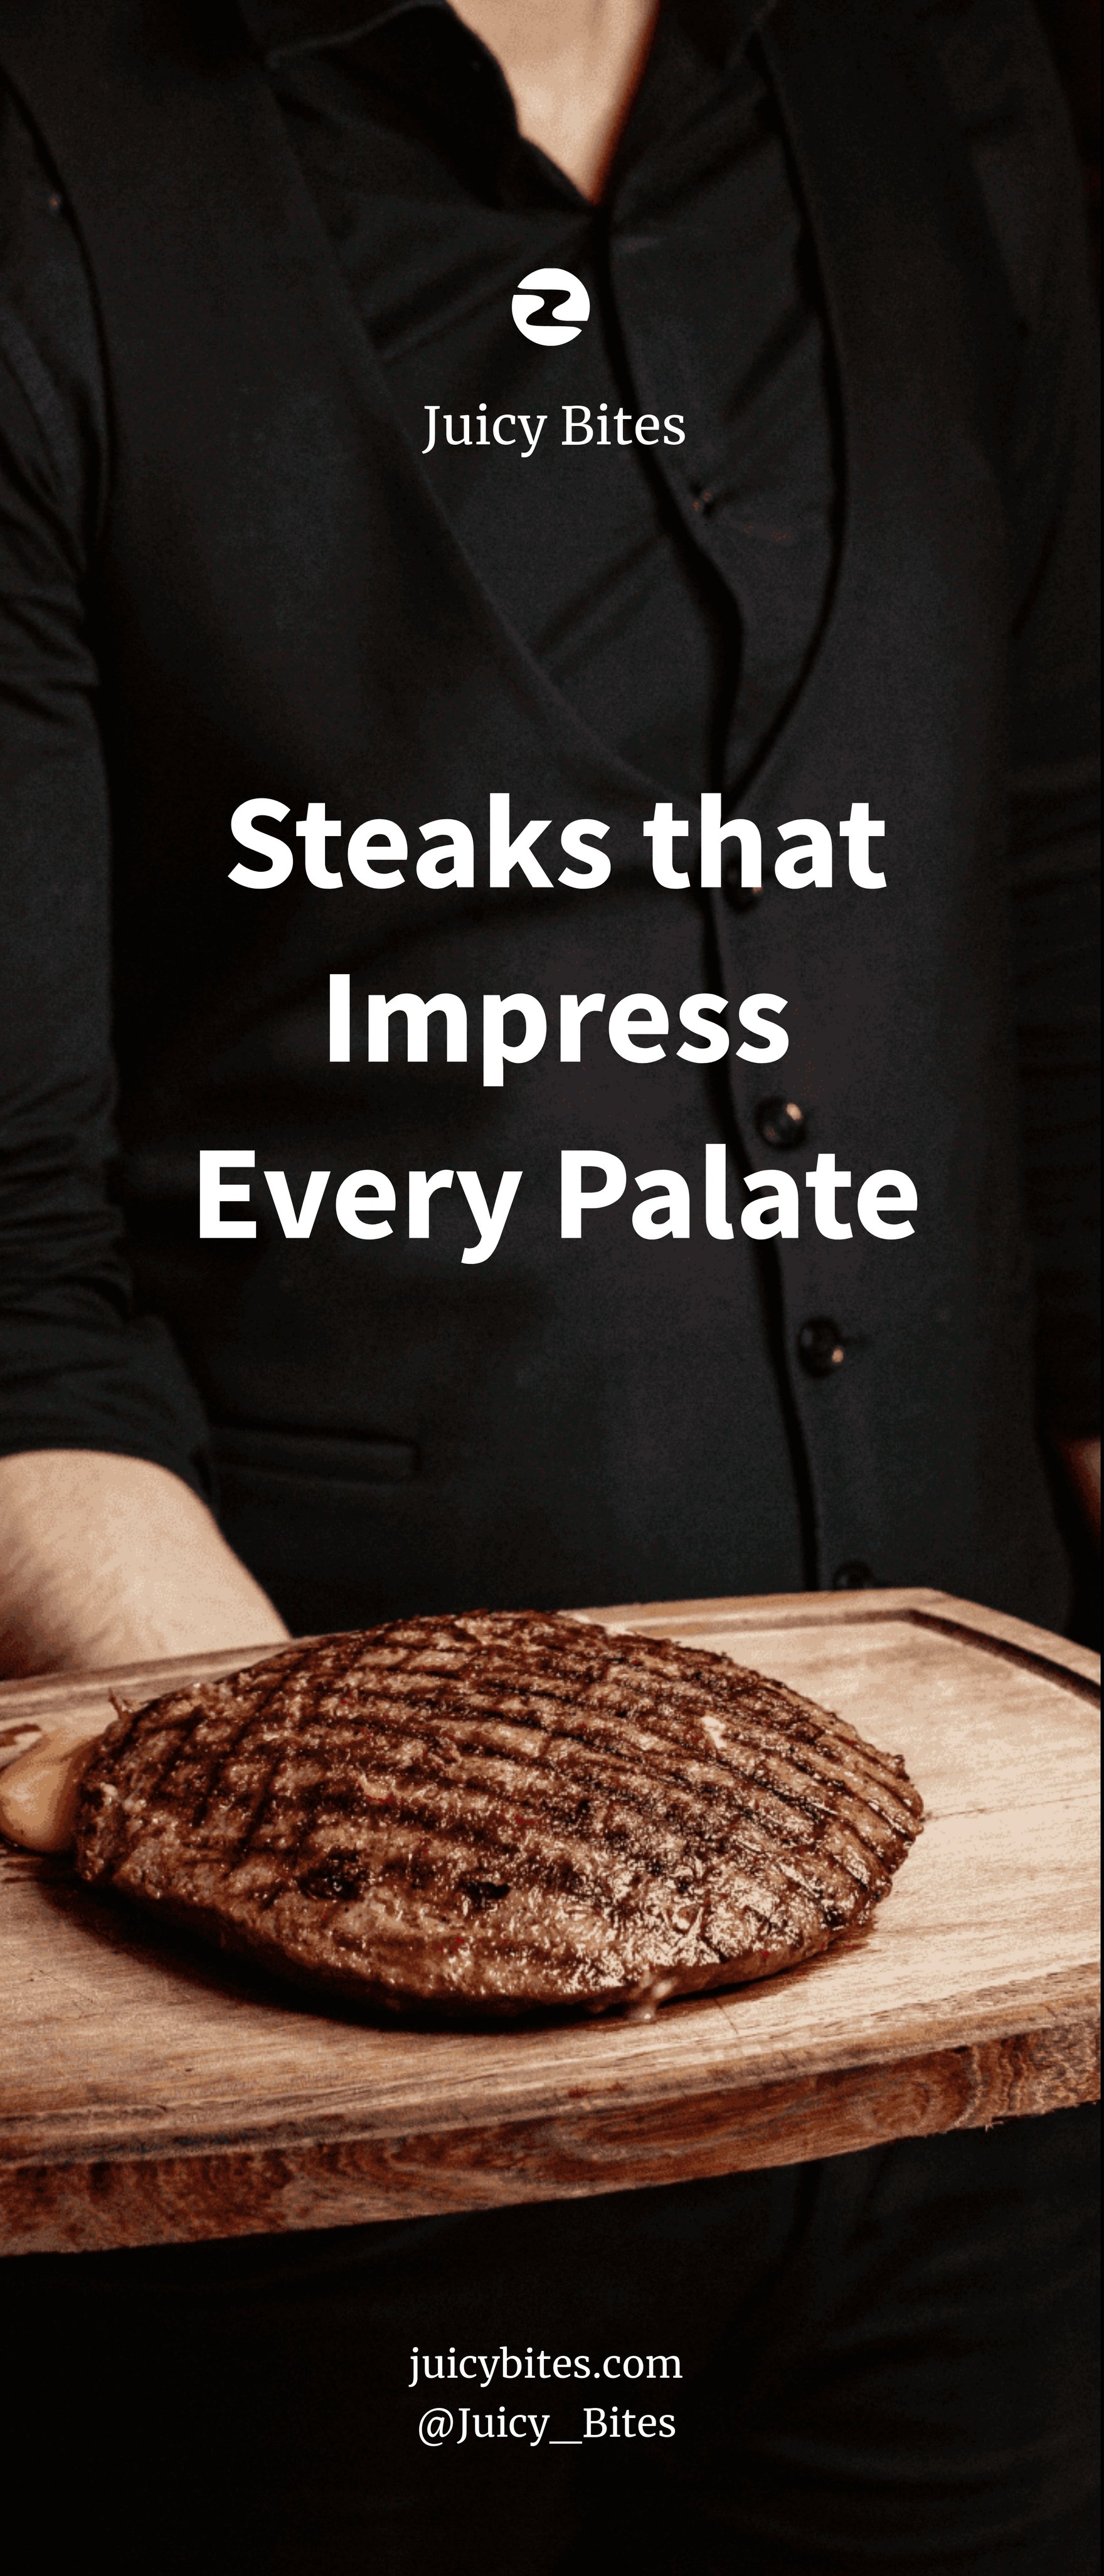 Steak Roll-Up Banner Template in Word, Google Docs, Apple Pages, Publisher